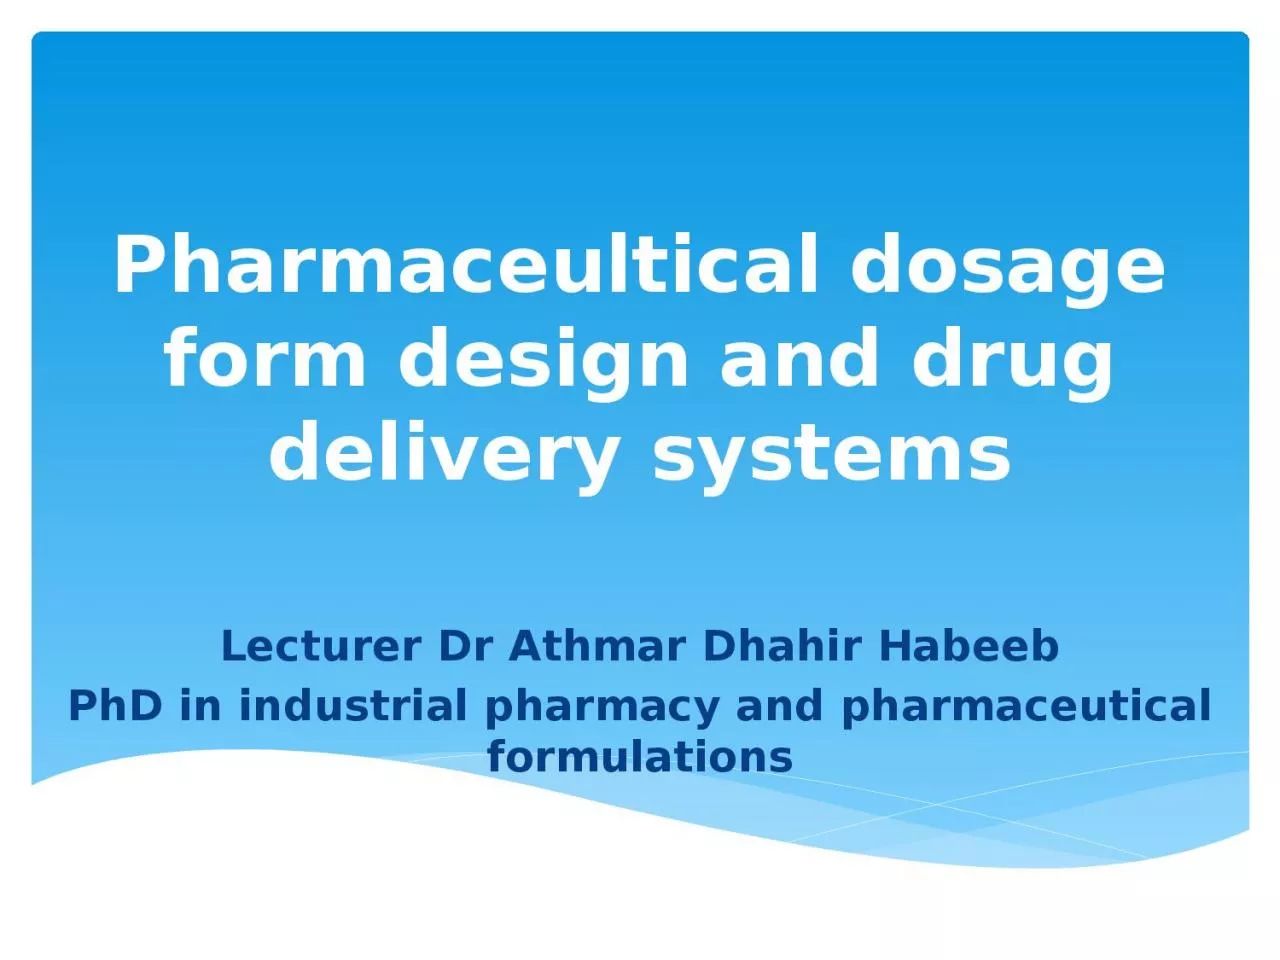 Pharmaceultical  dosage form design and drug delivery systems